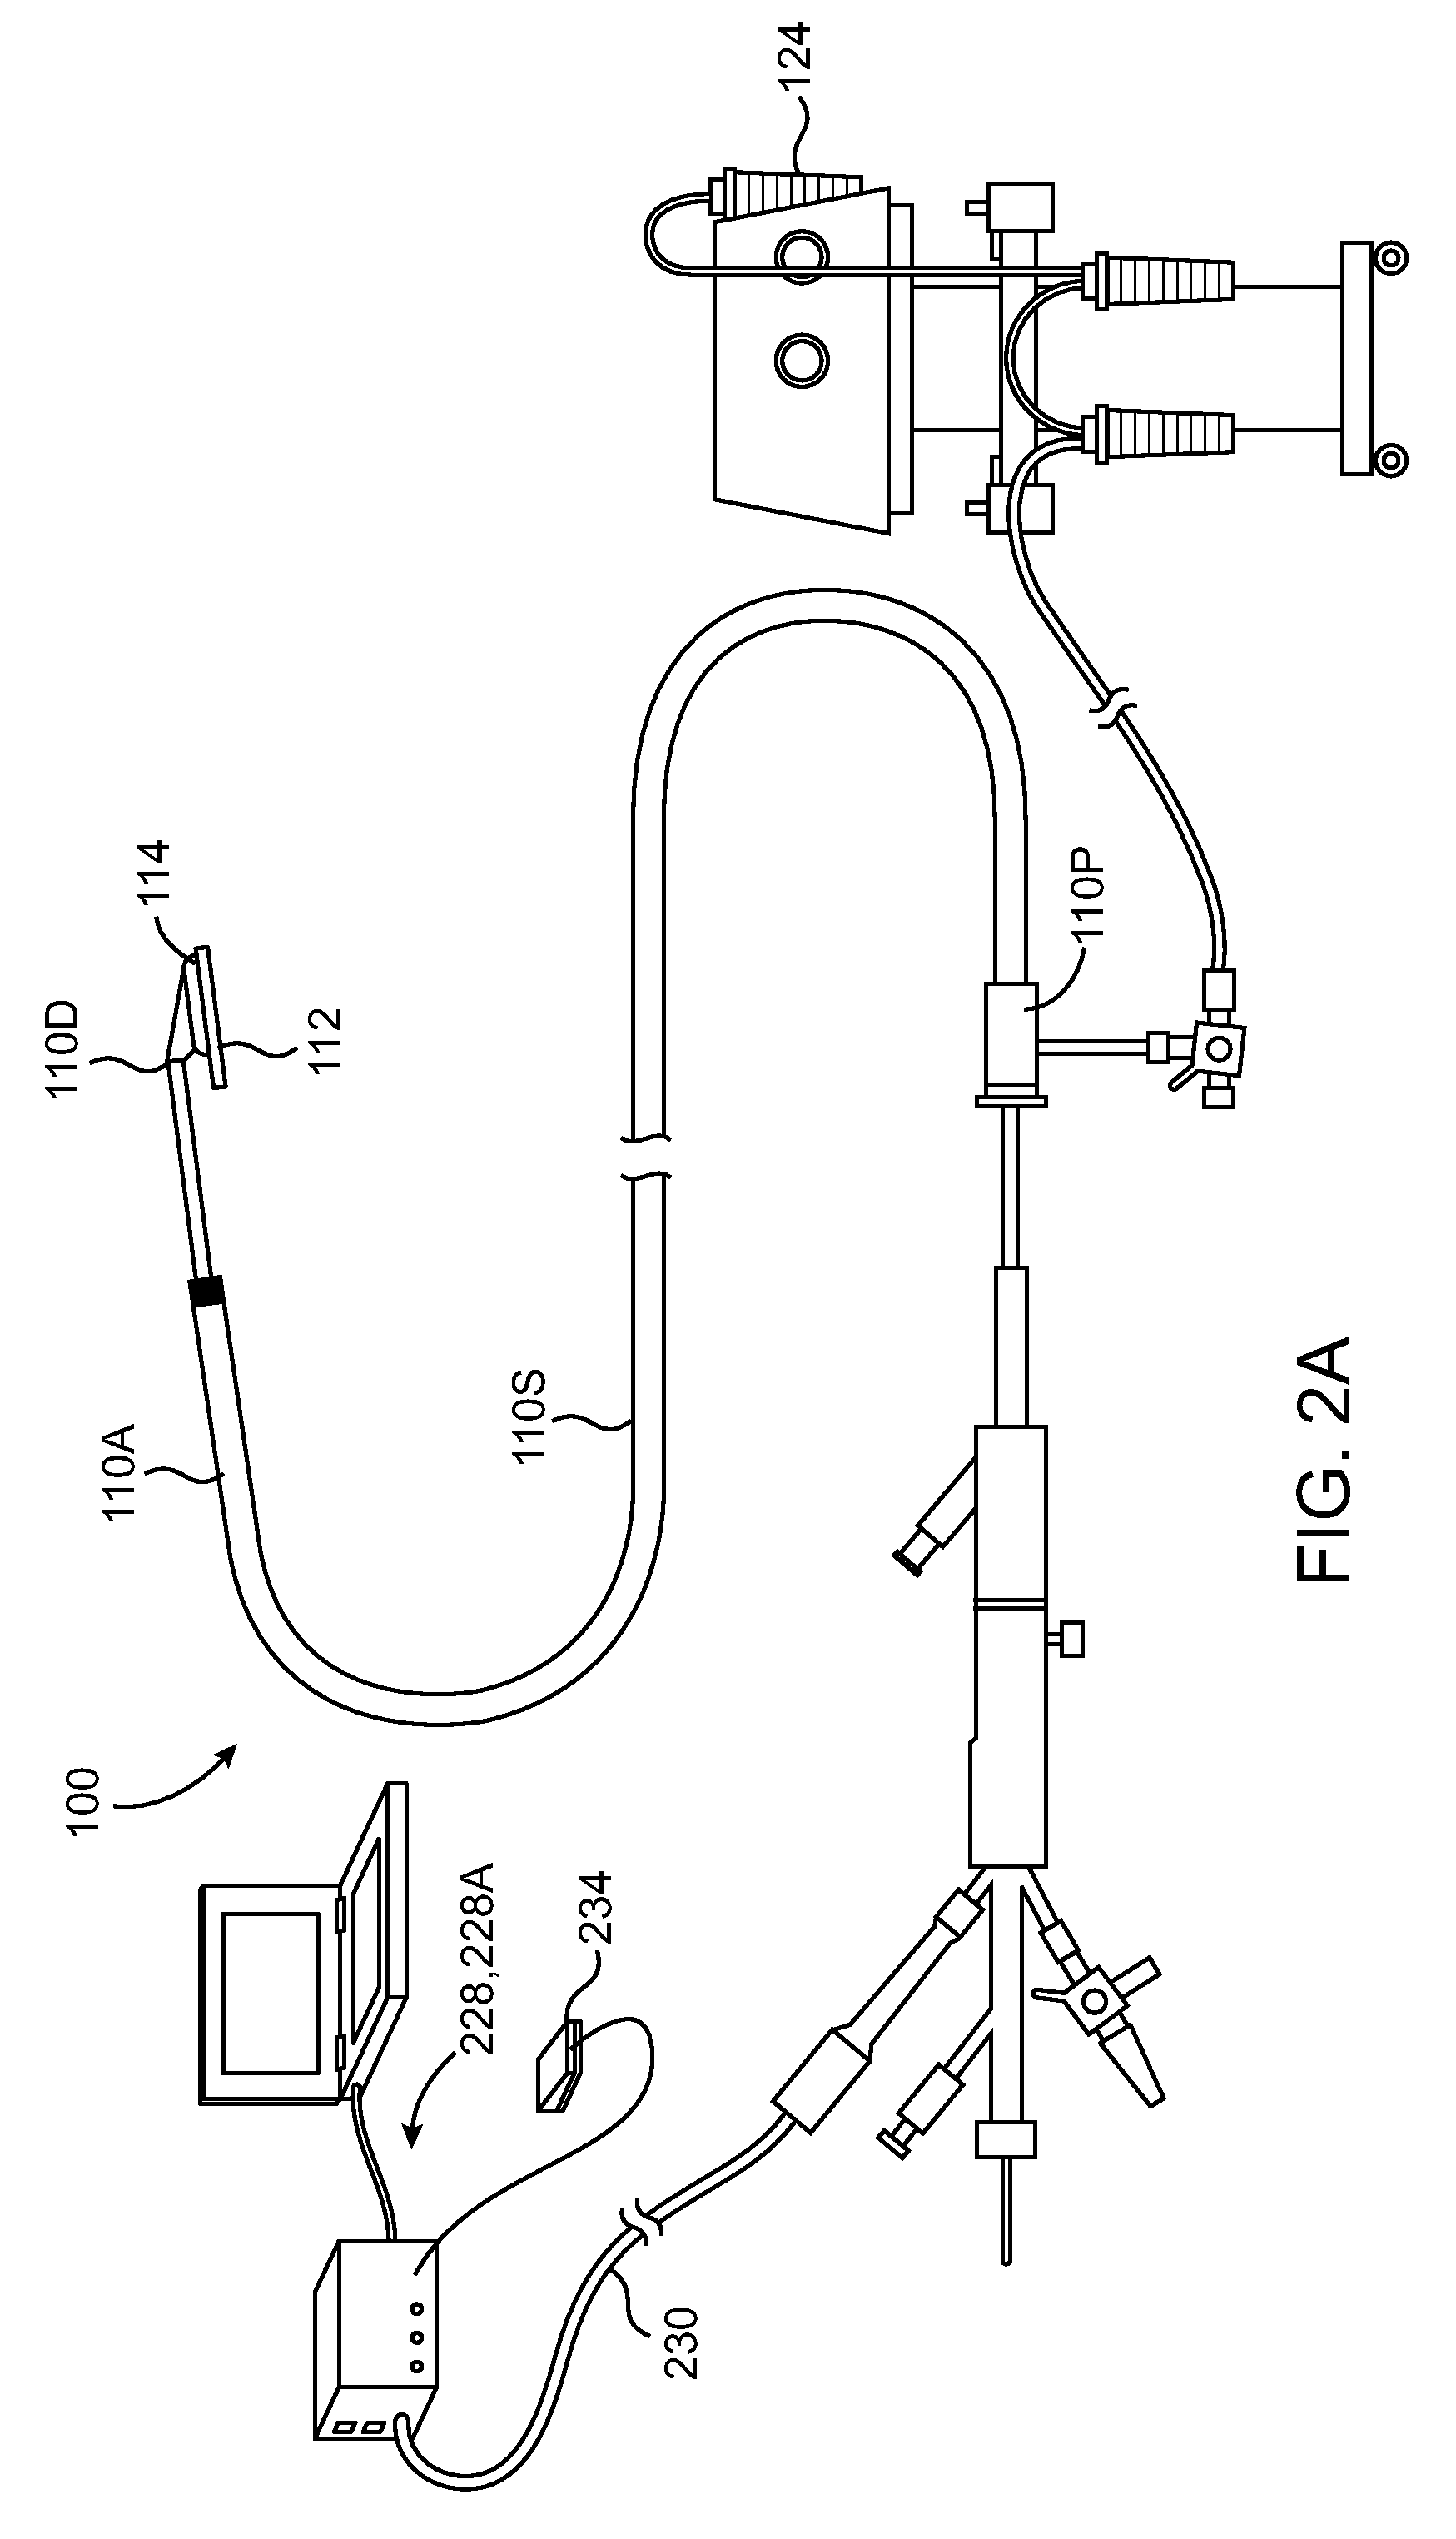 Energy delivery apparatus with tissue piercing thermocouple